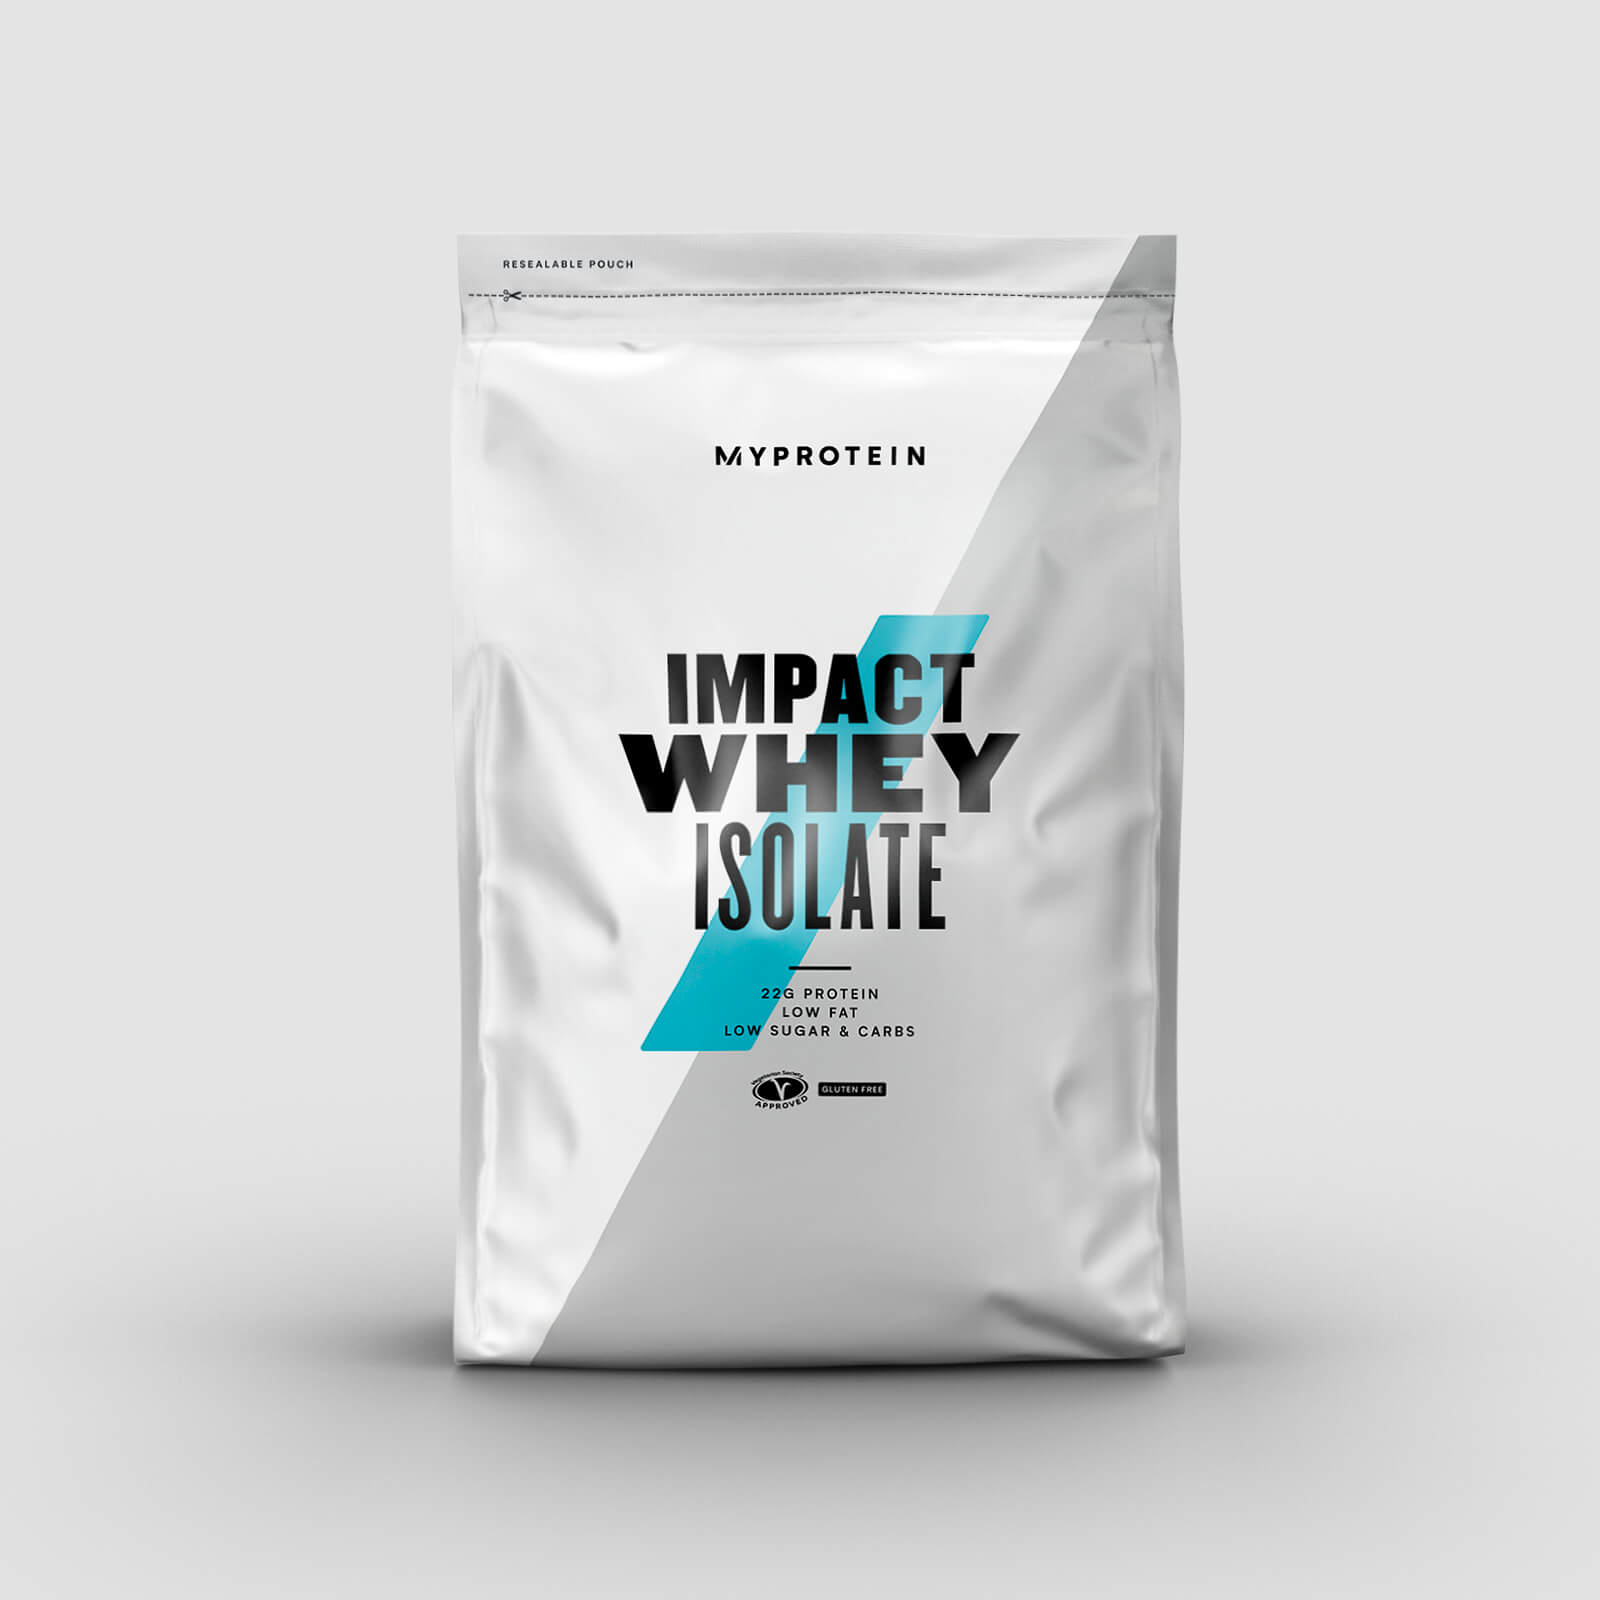 Myprotein Impact Whey Isolate - 2.5kg - Rocky road brownie